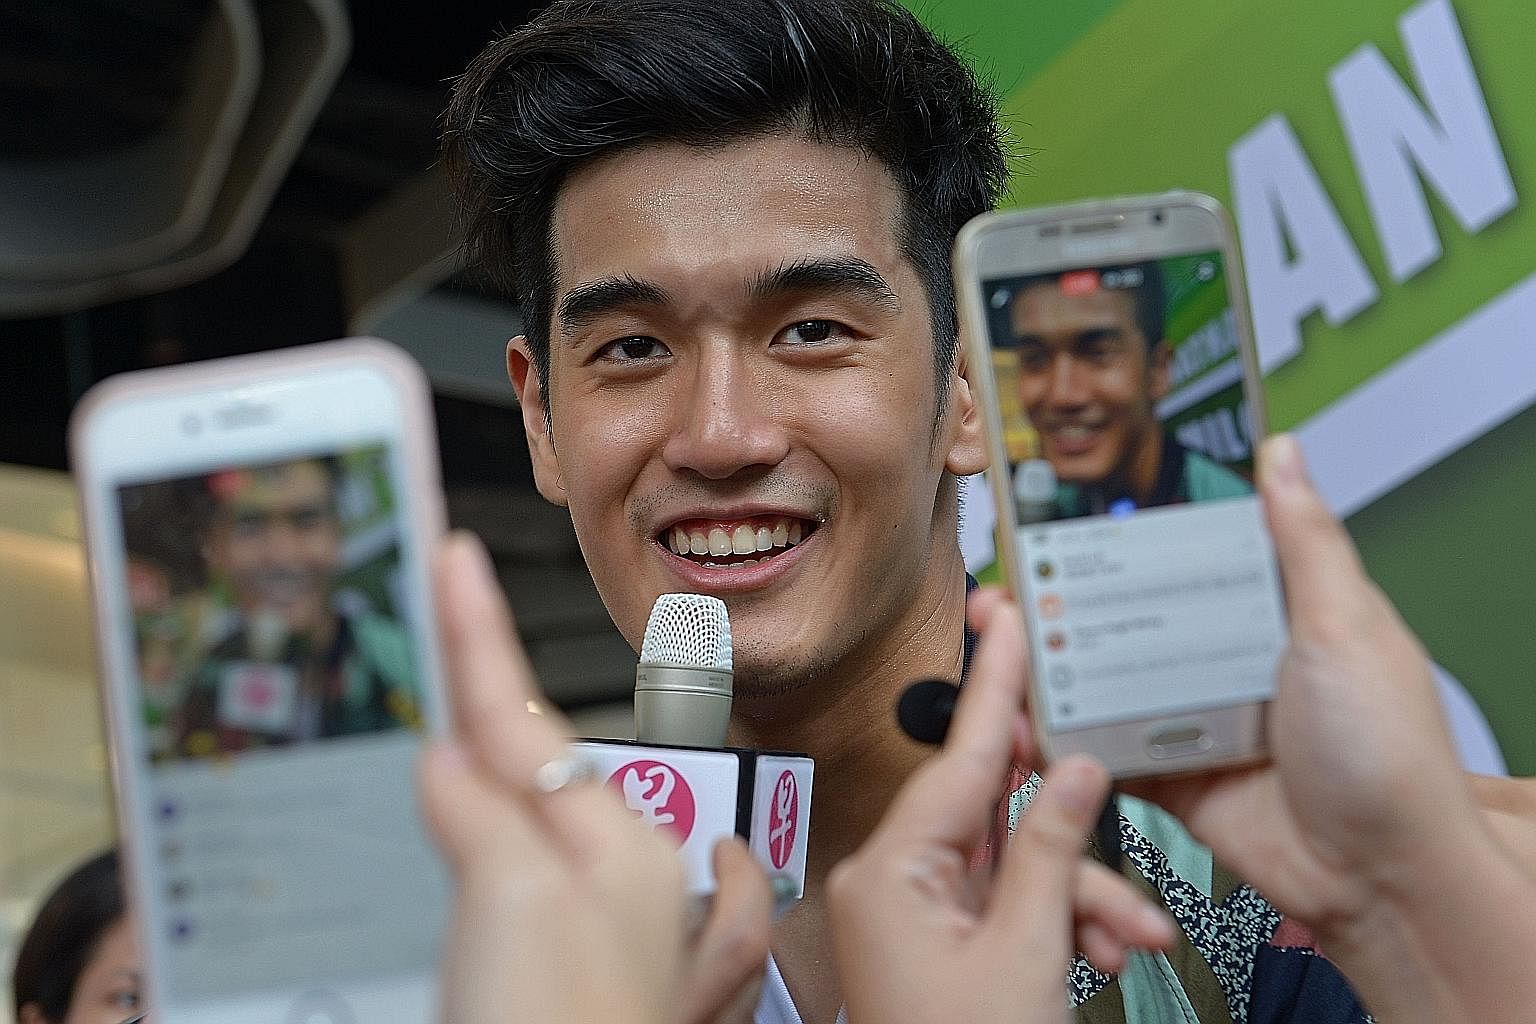 Nathan Hartono broke into the mainstream here only after he came in second in the hit Chinese TV singing contest Sing! China.